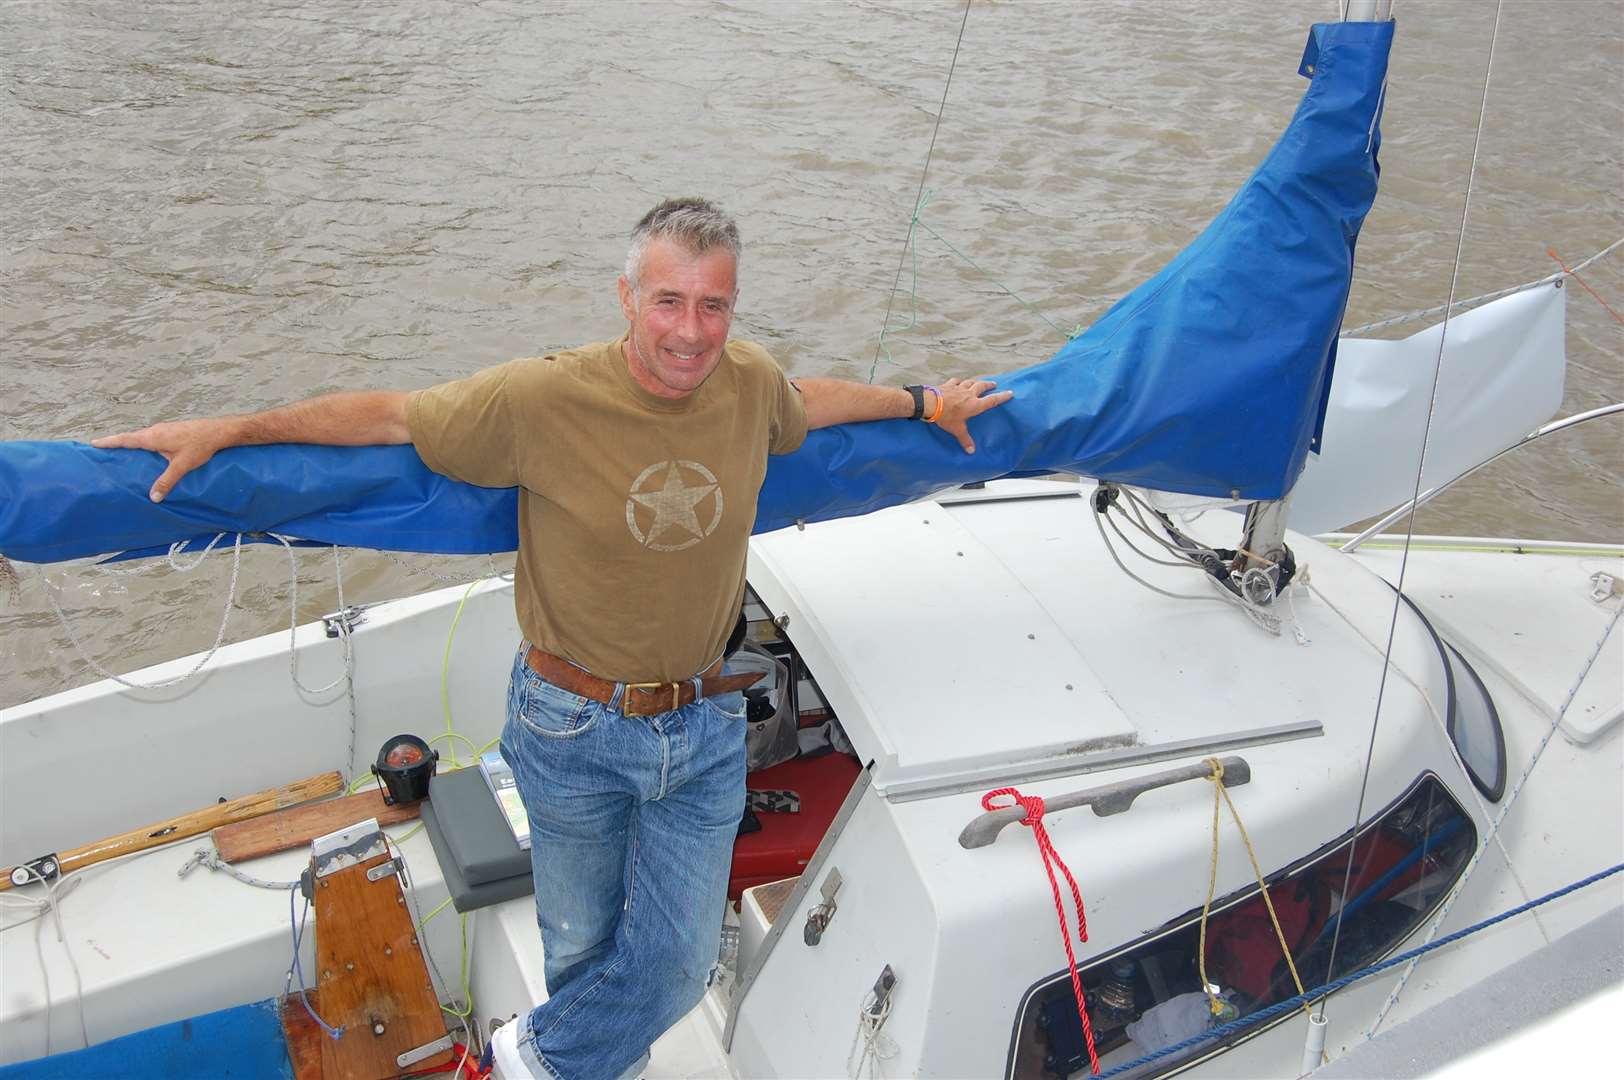 Dave Selby was in Gravesend as part of his epic 300 mile journey.